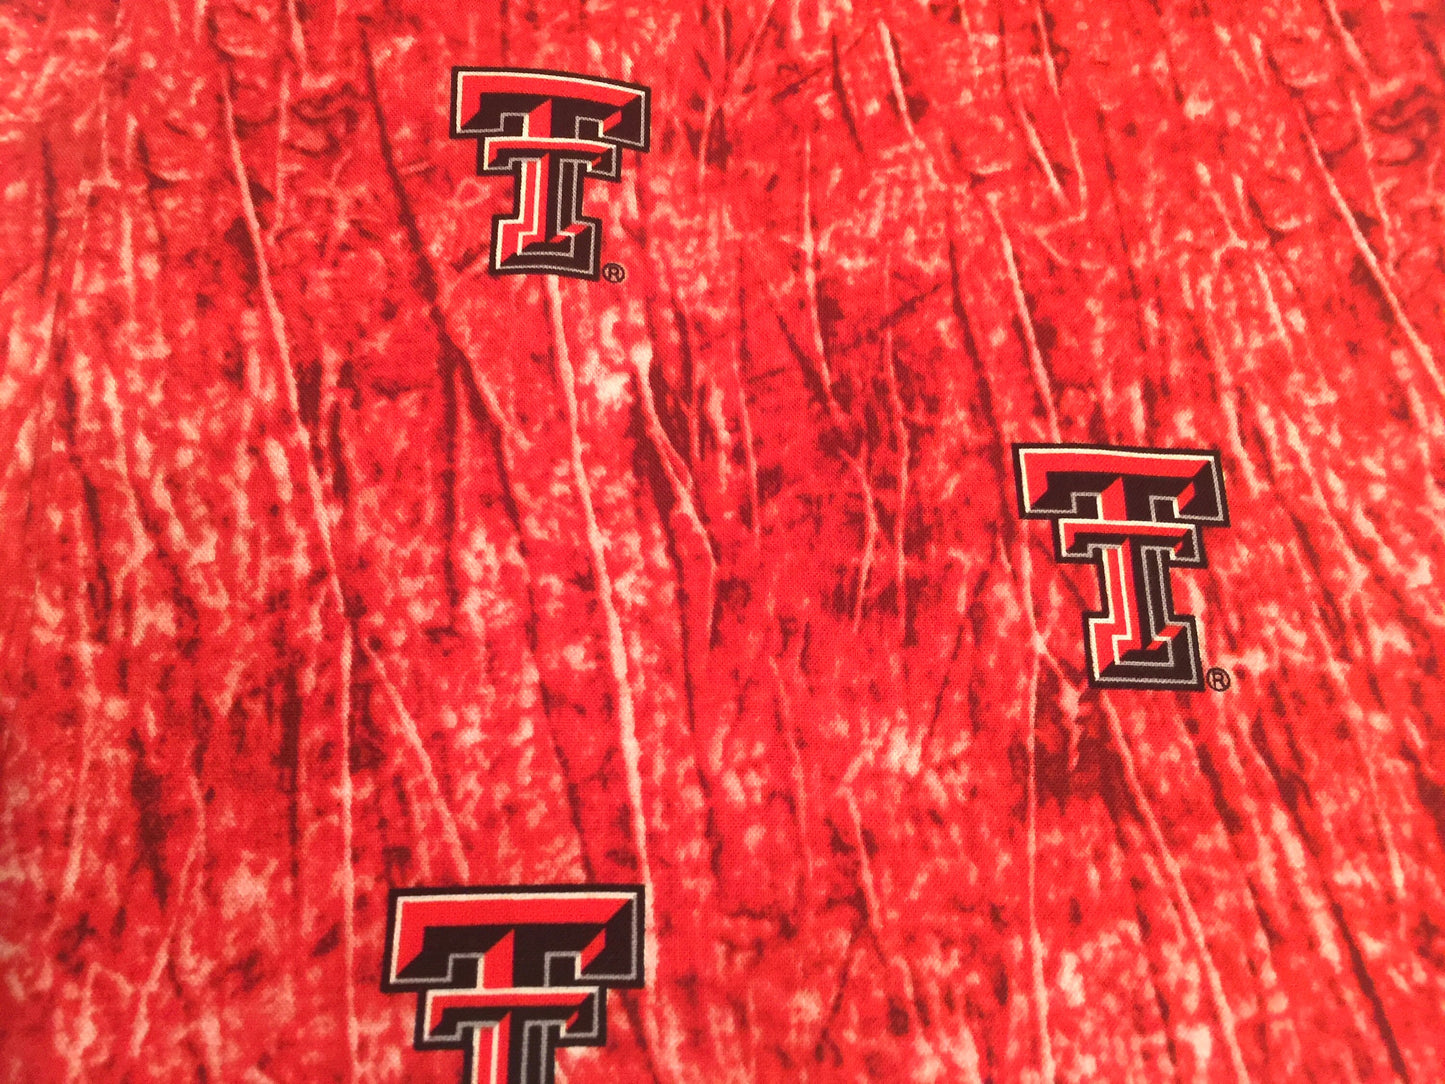 Texas Tech Red Raider reversible designer lap quilt and blanket